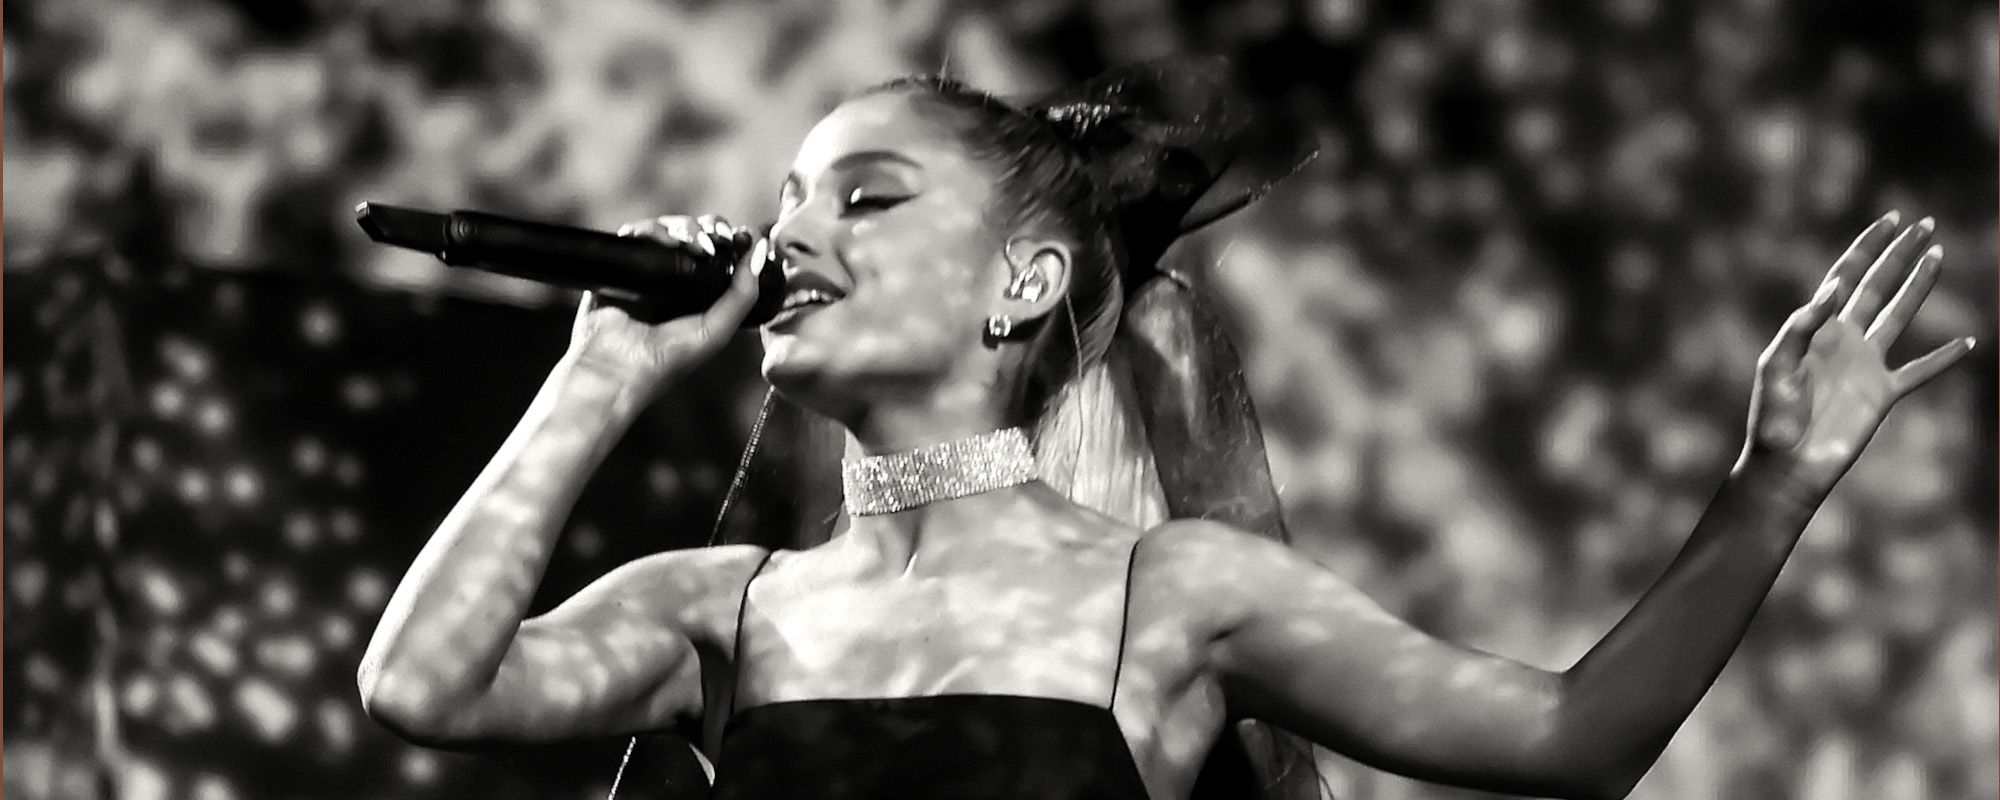 Study Finds Ariana Grande’s Music Among Most Relatable Breakup Songs